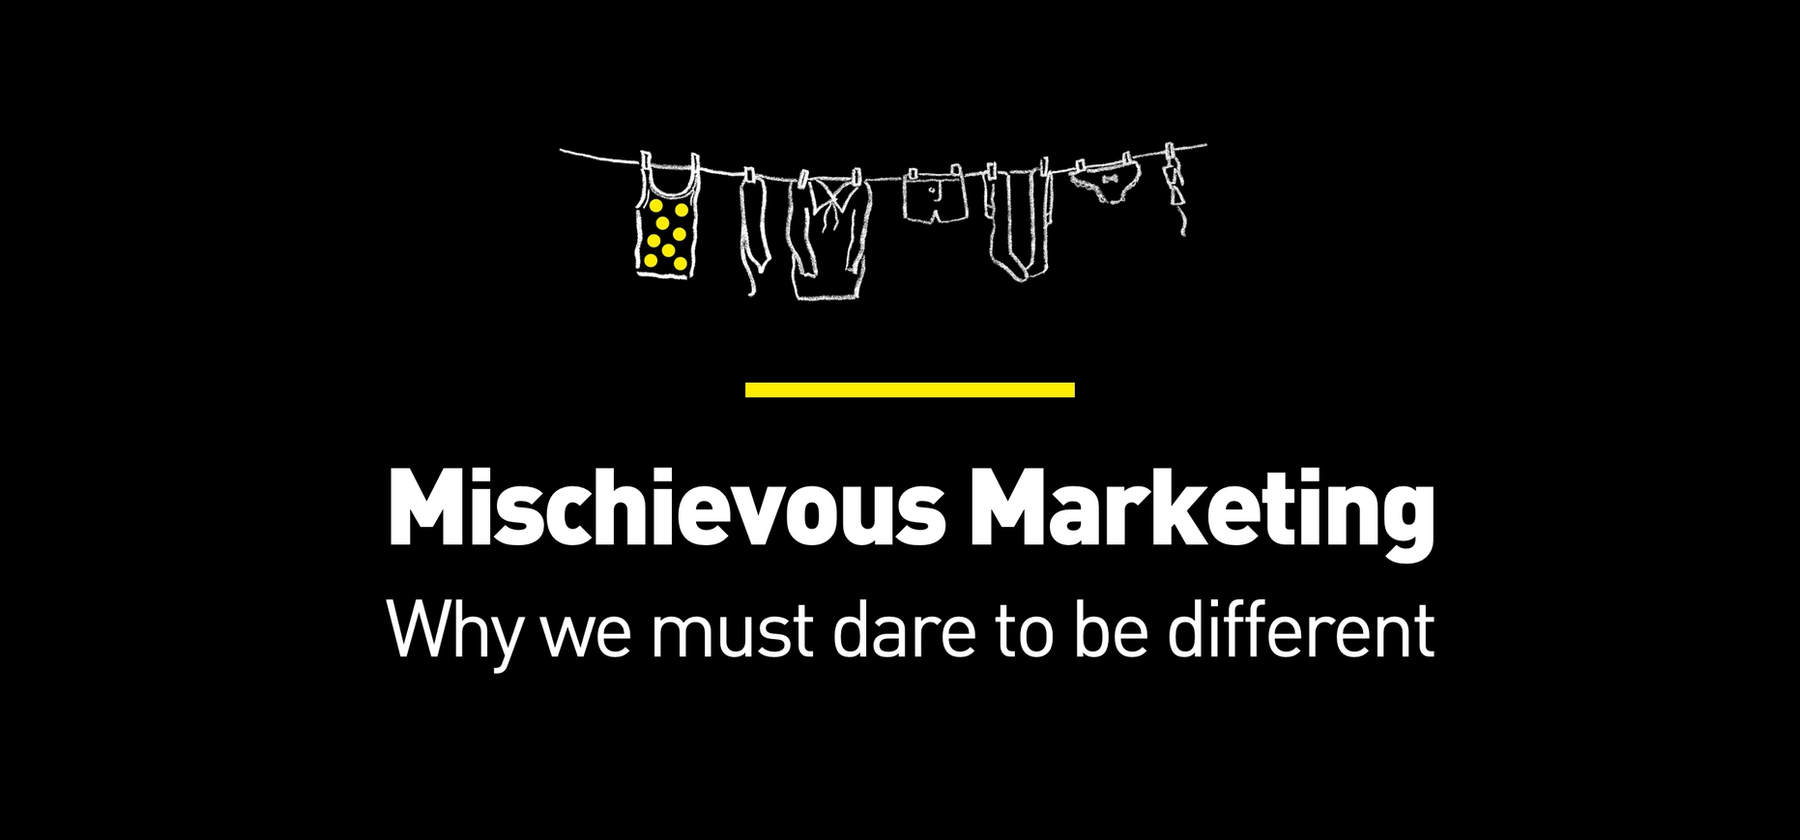 Mischievous marketing: why we must dare to be different